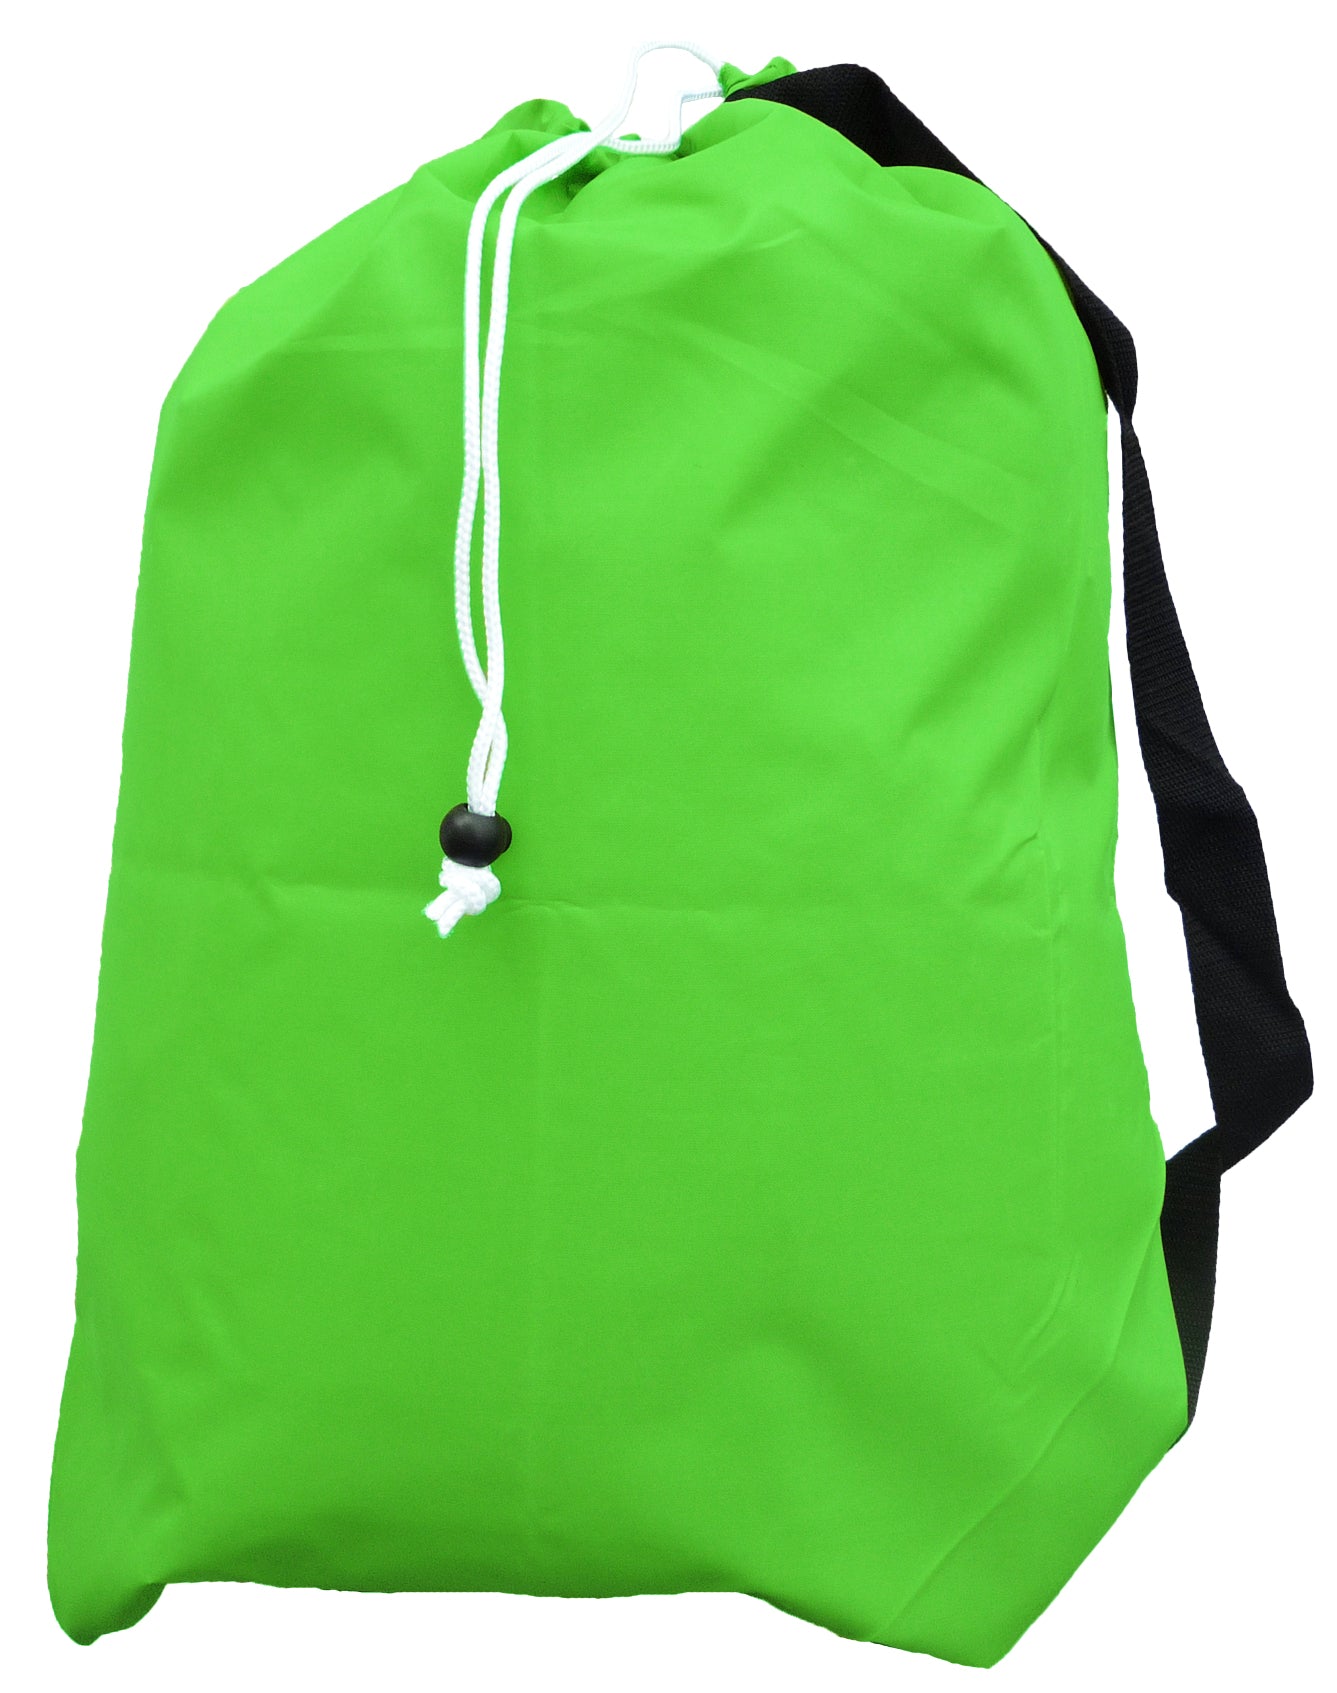 Small Laundry Bag with Strap, Fluorescent Lime Green